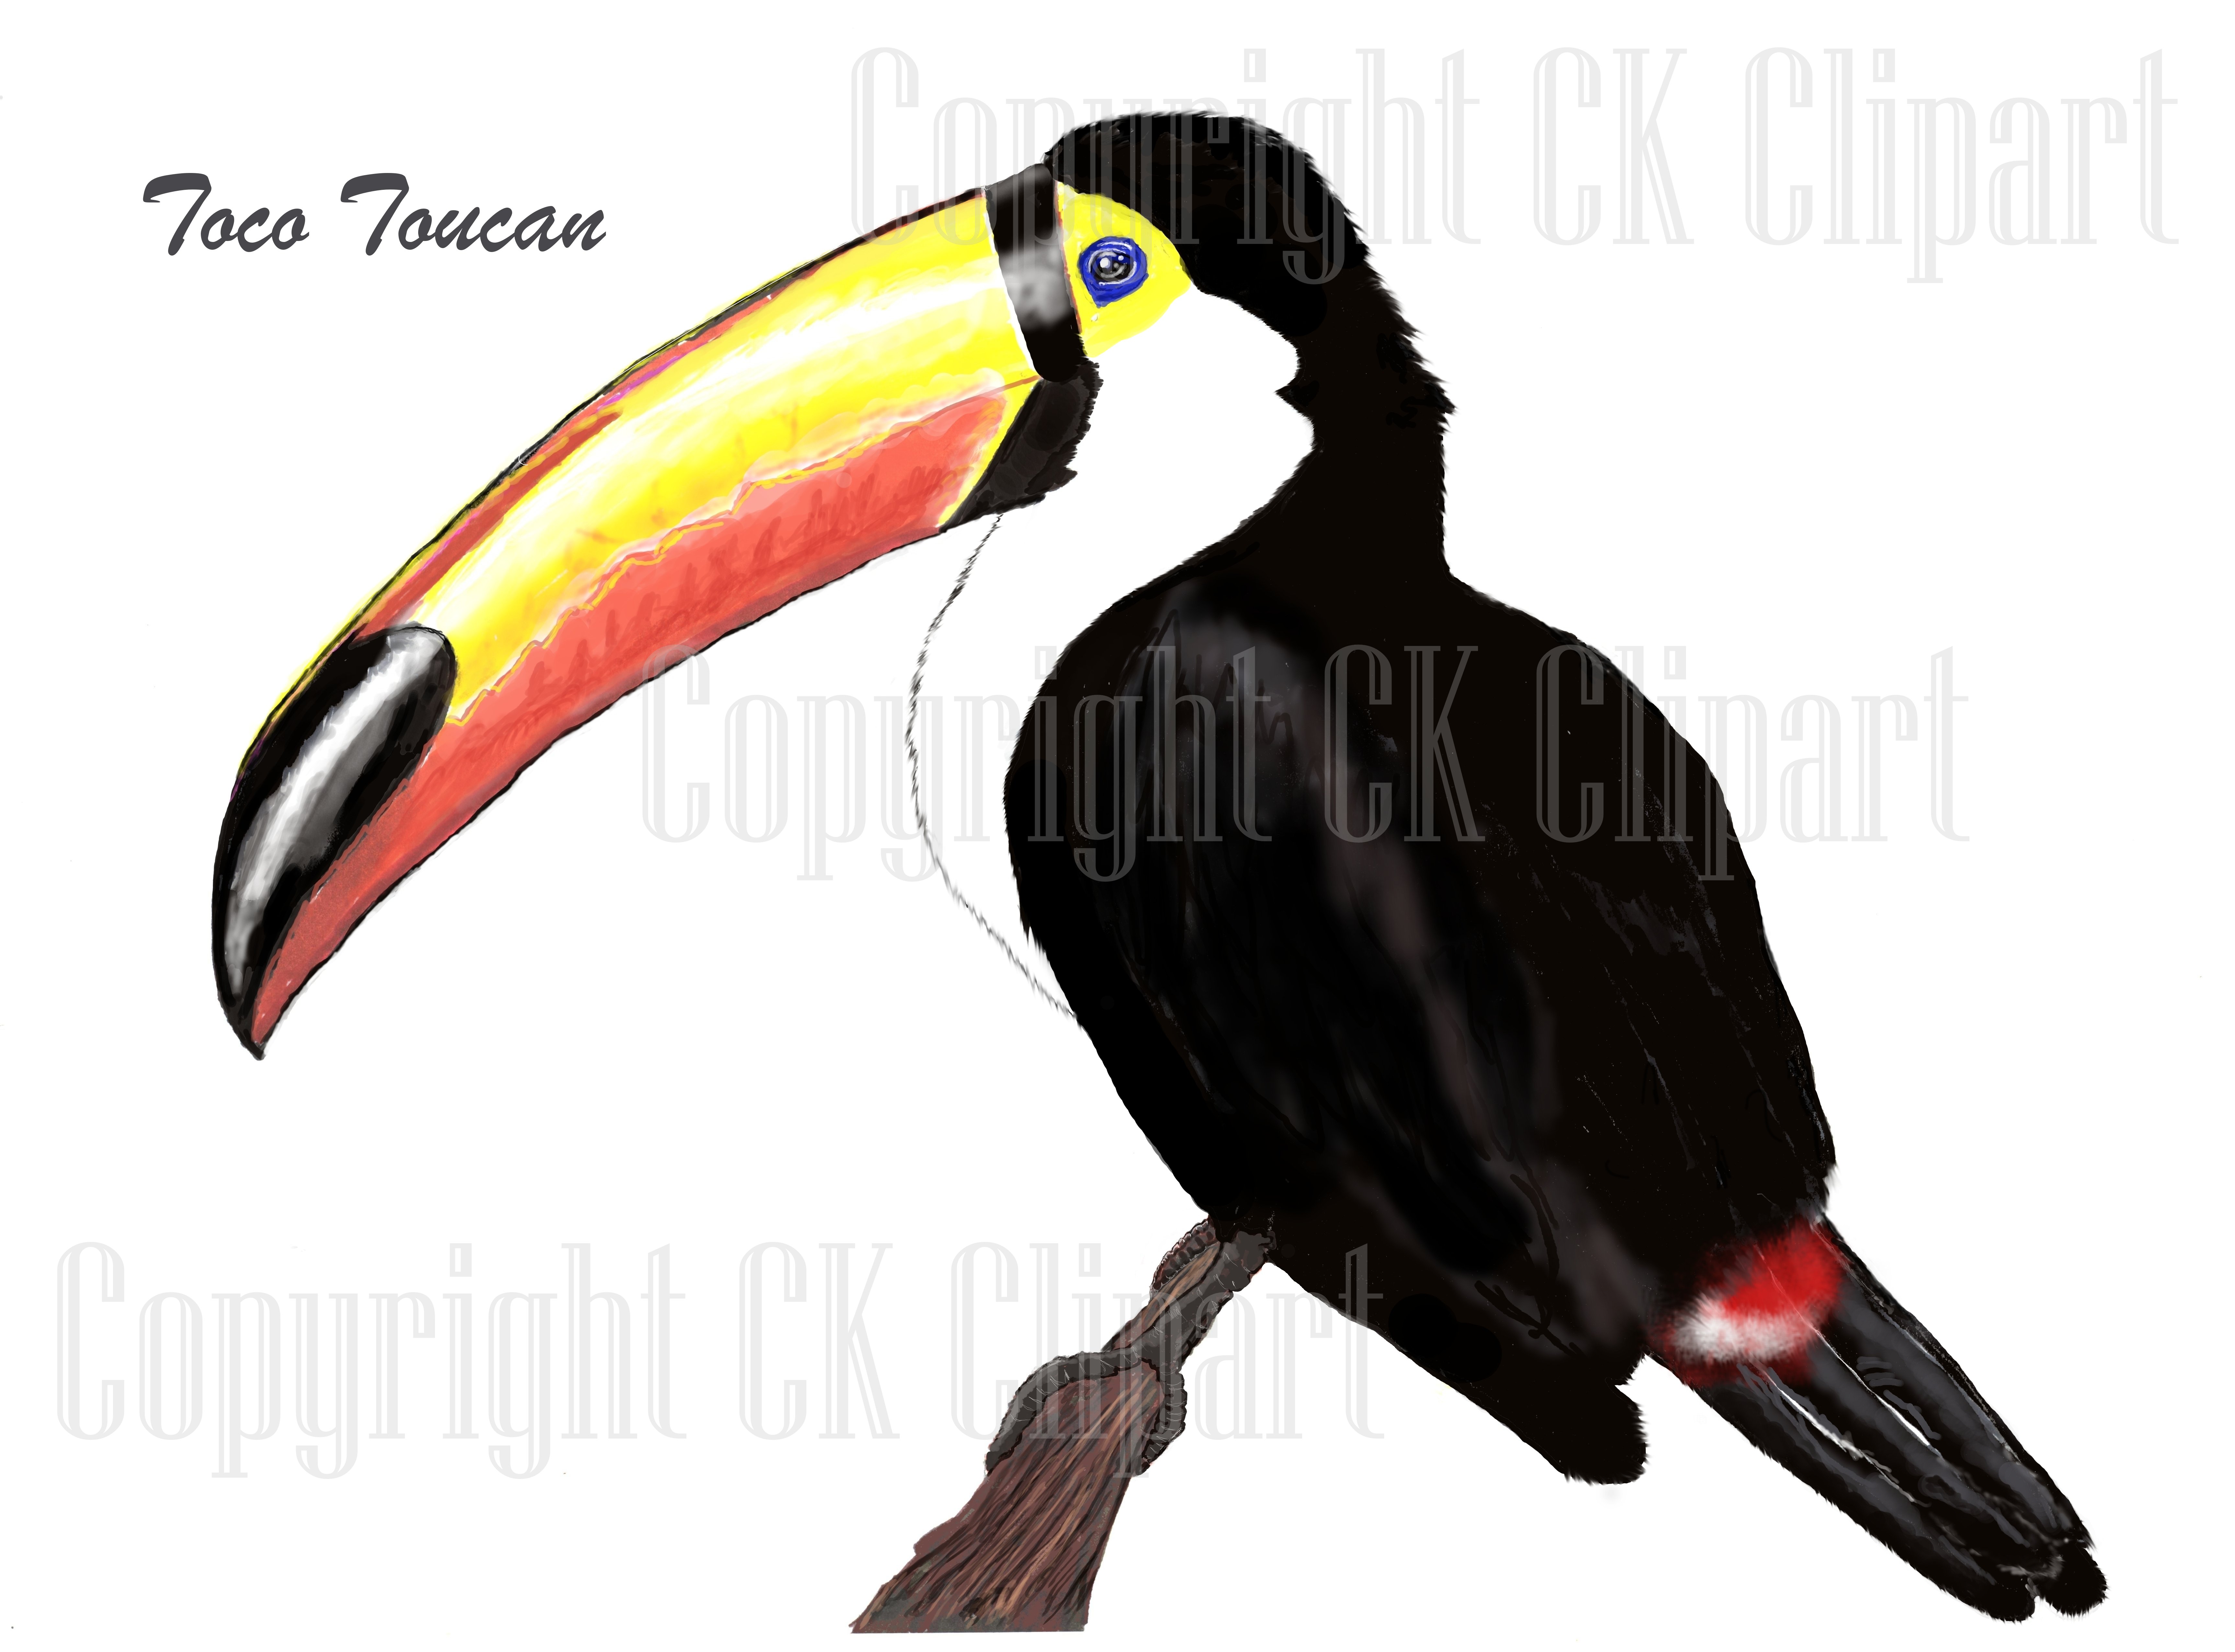 Toco Toucan clipart #4, Download drawings